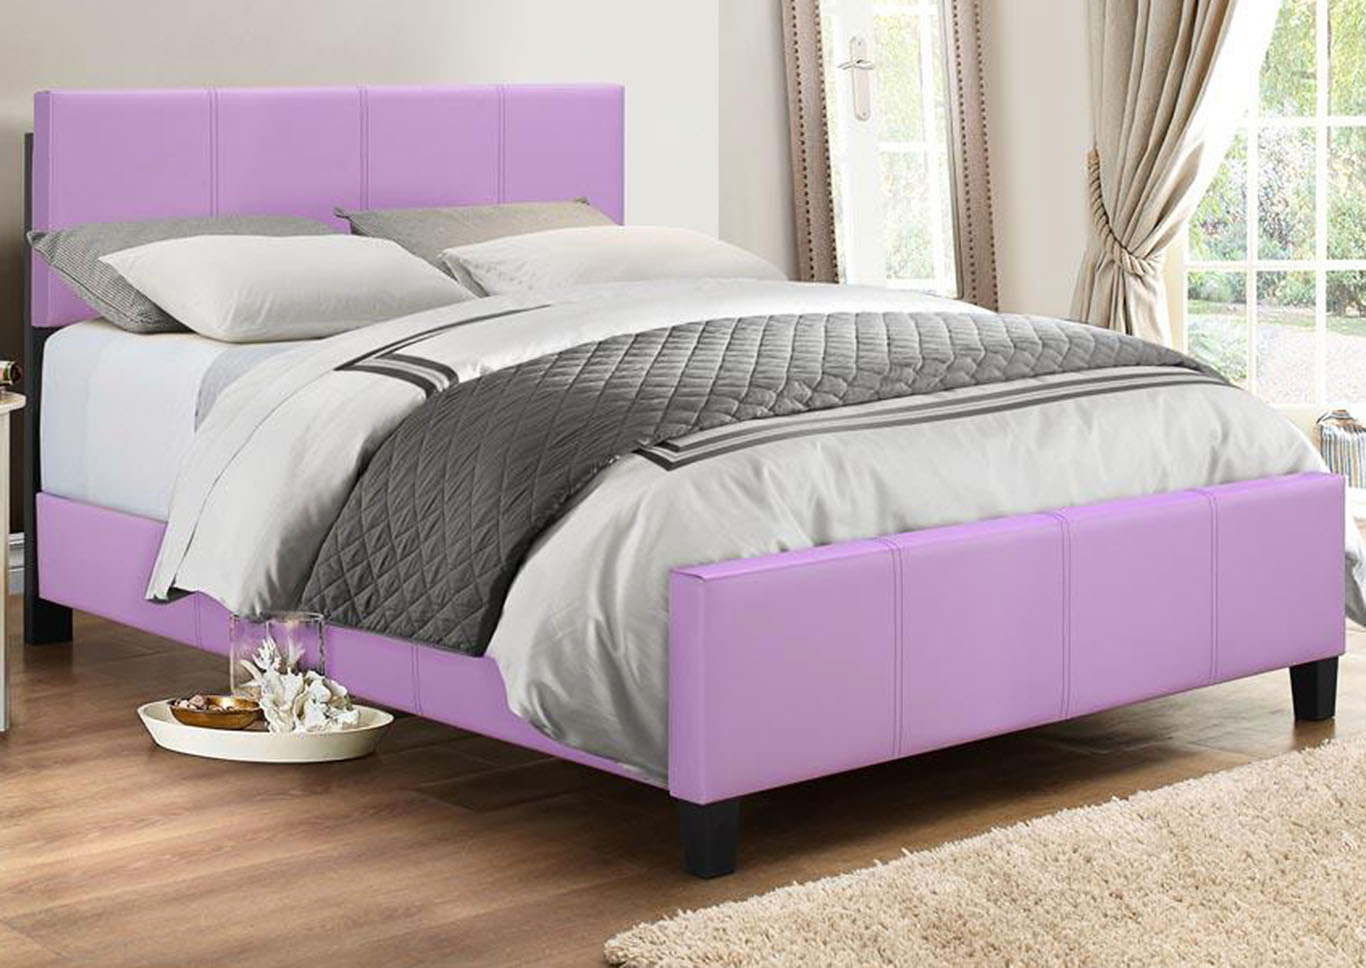 Zenfield Lilac Upholstered PU Twin Bed,Global Trading